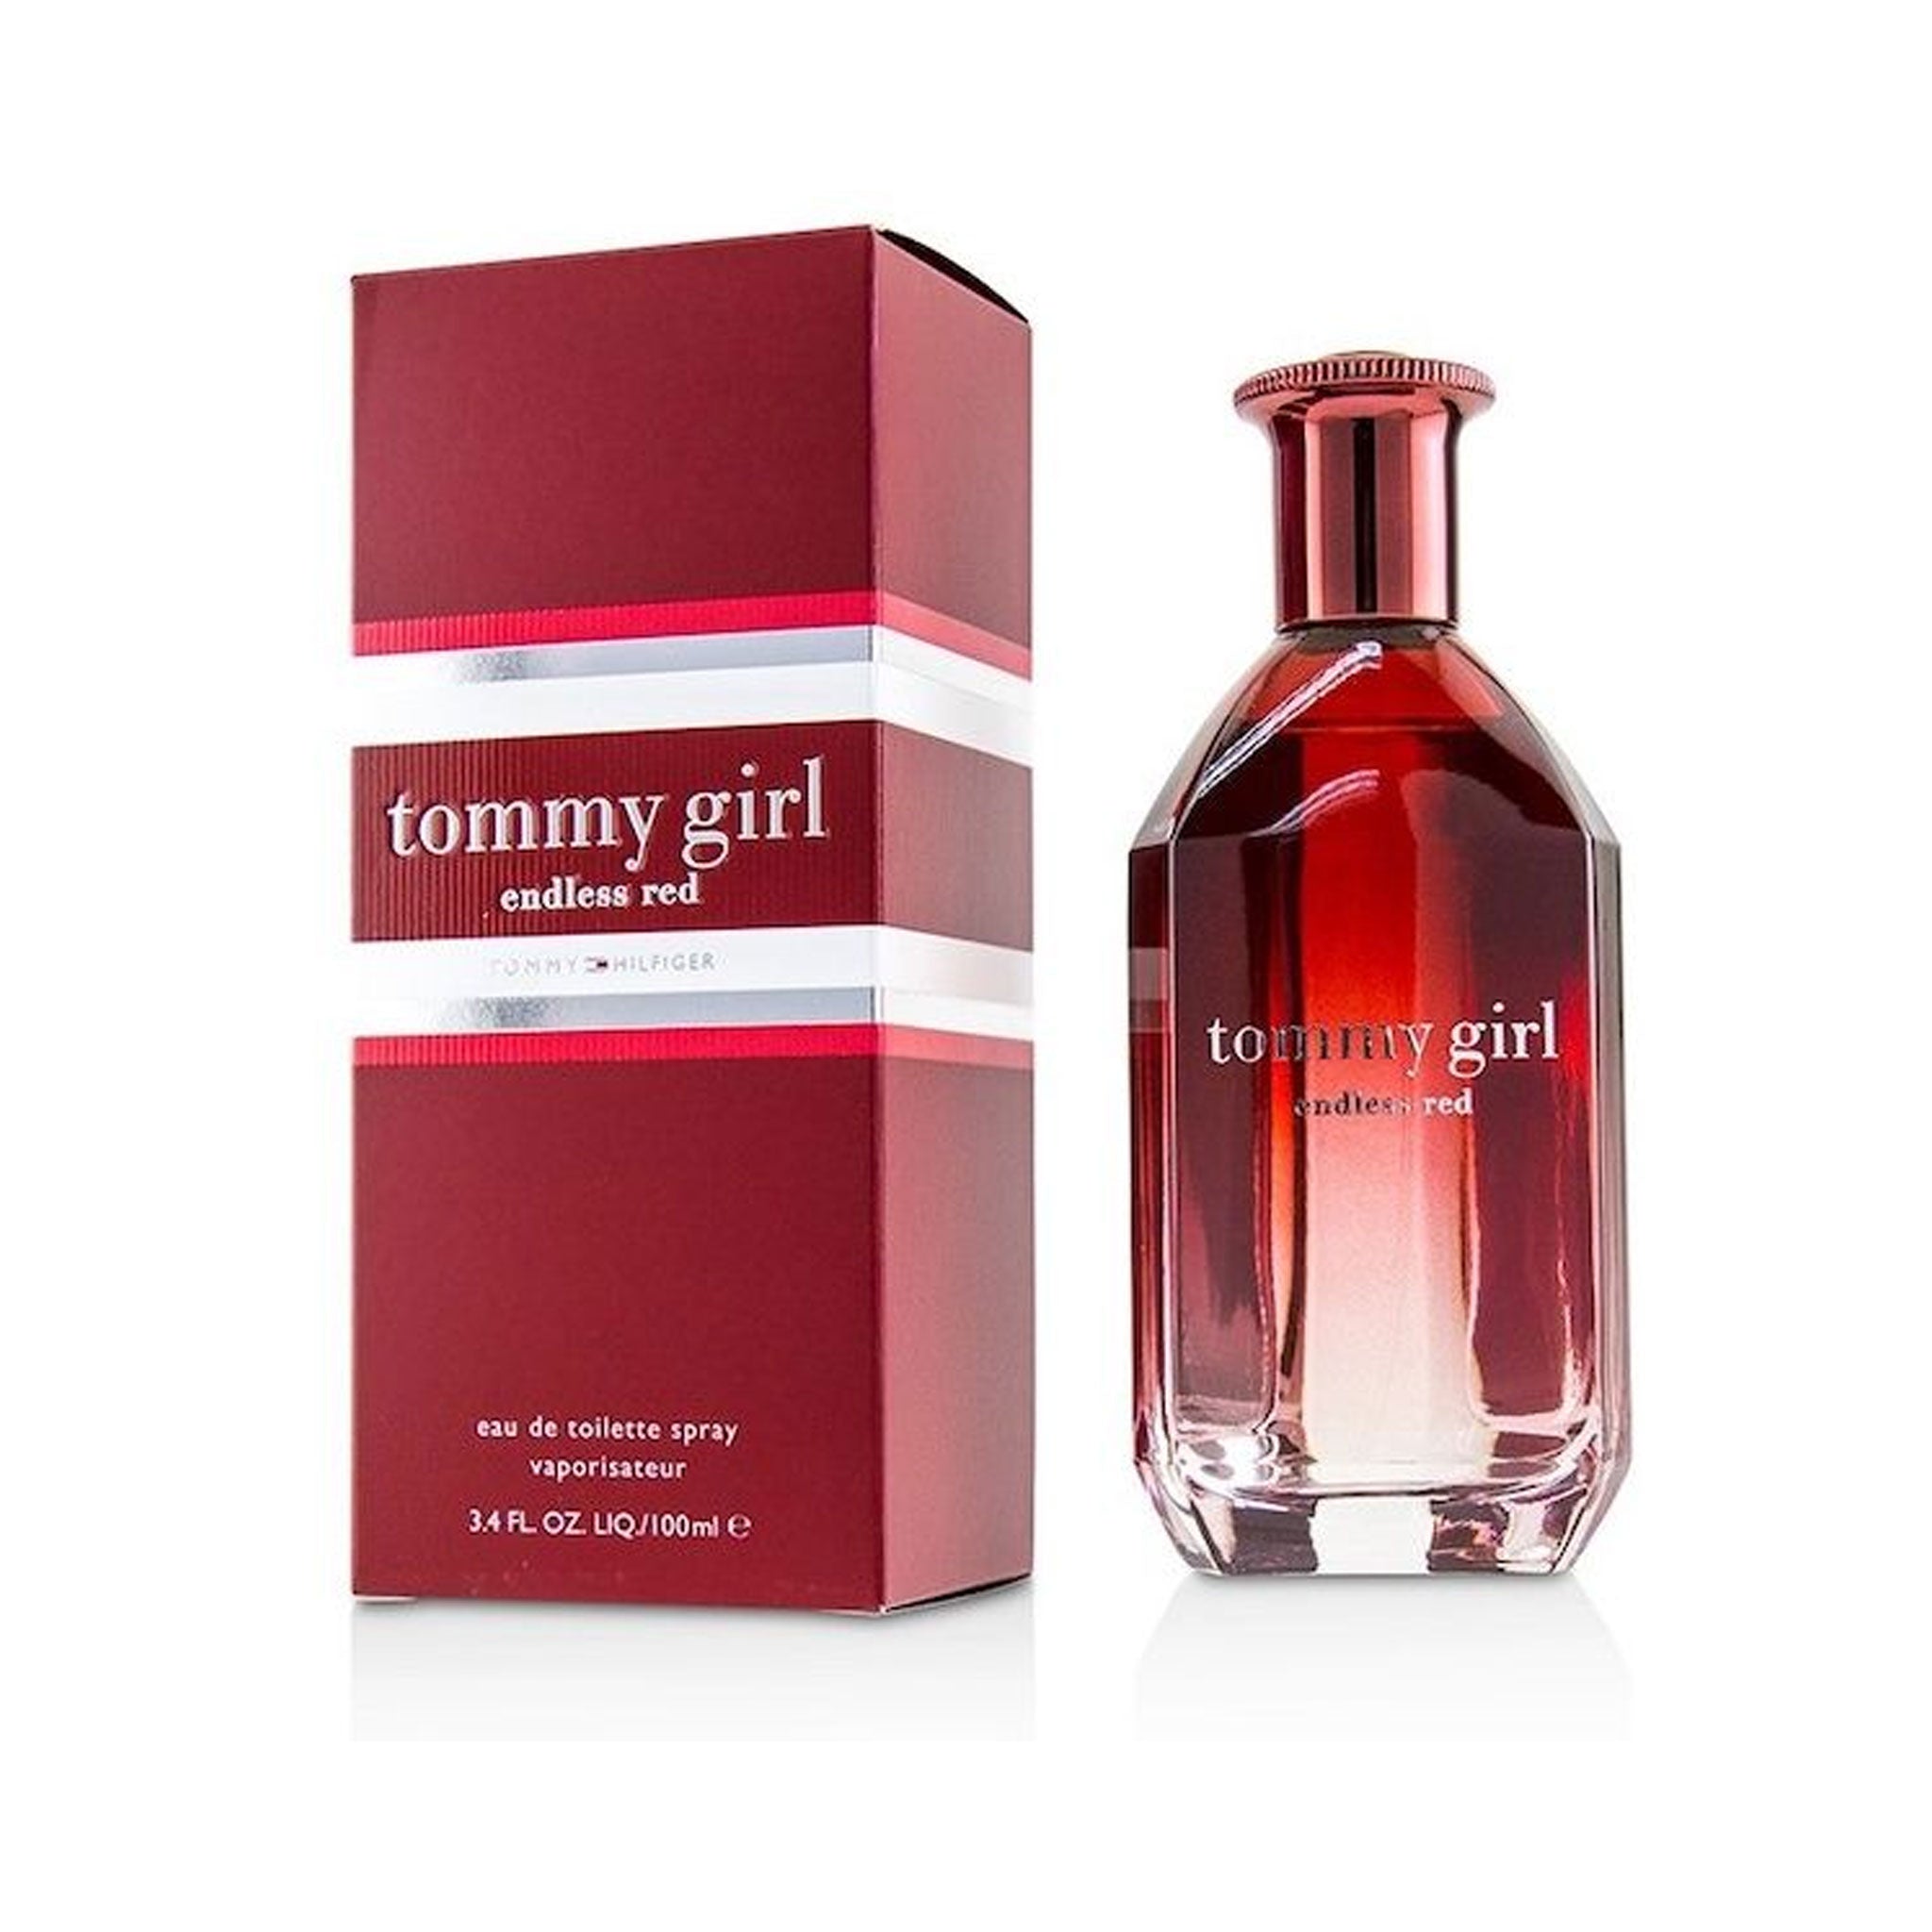 Tommy Hilfiger Tommy Girl Endless Red EDT For Her 100mL - Endless Red